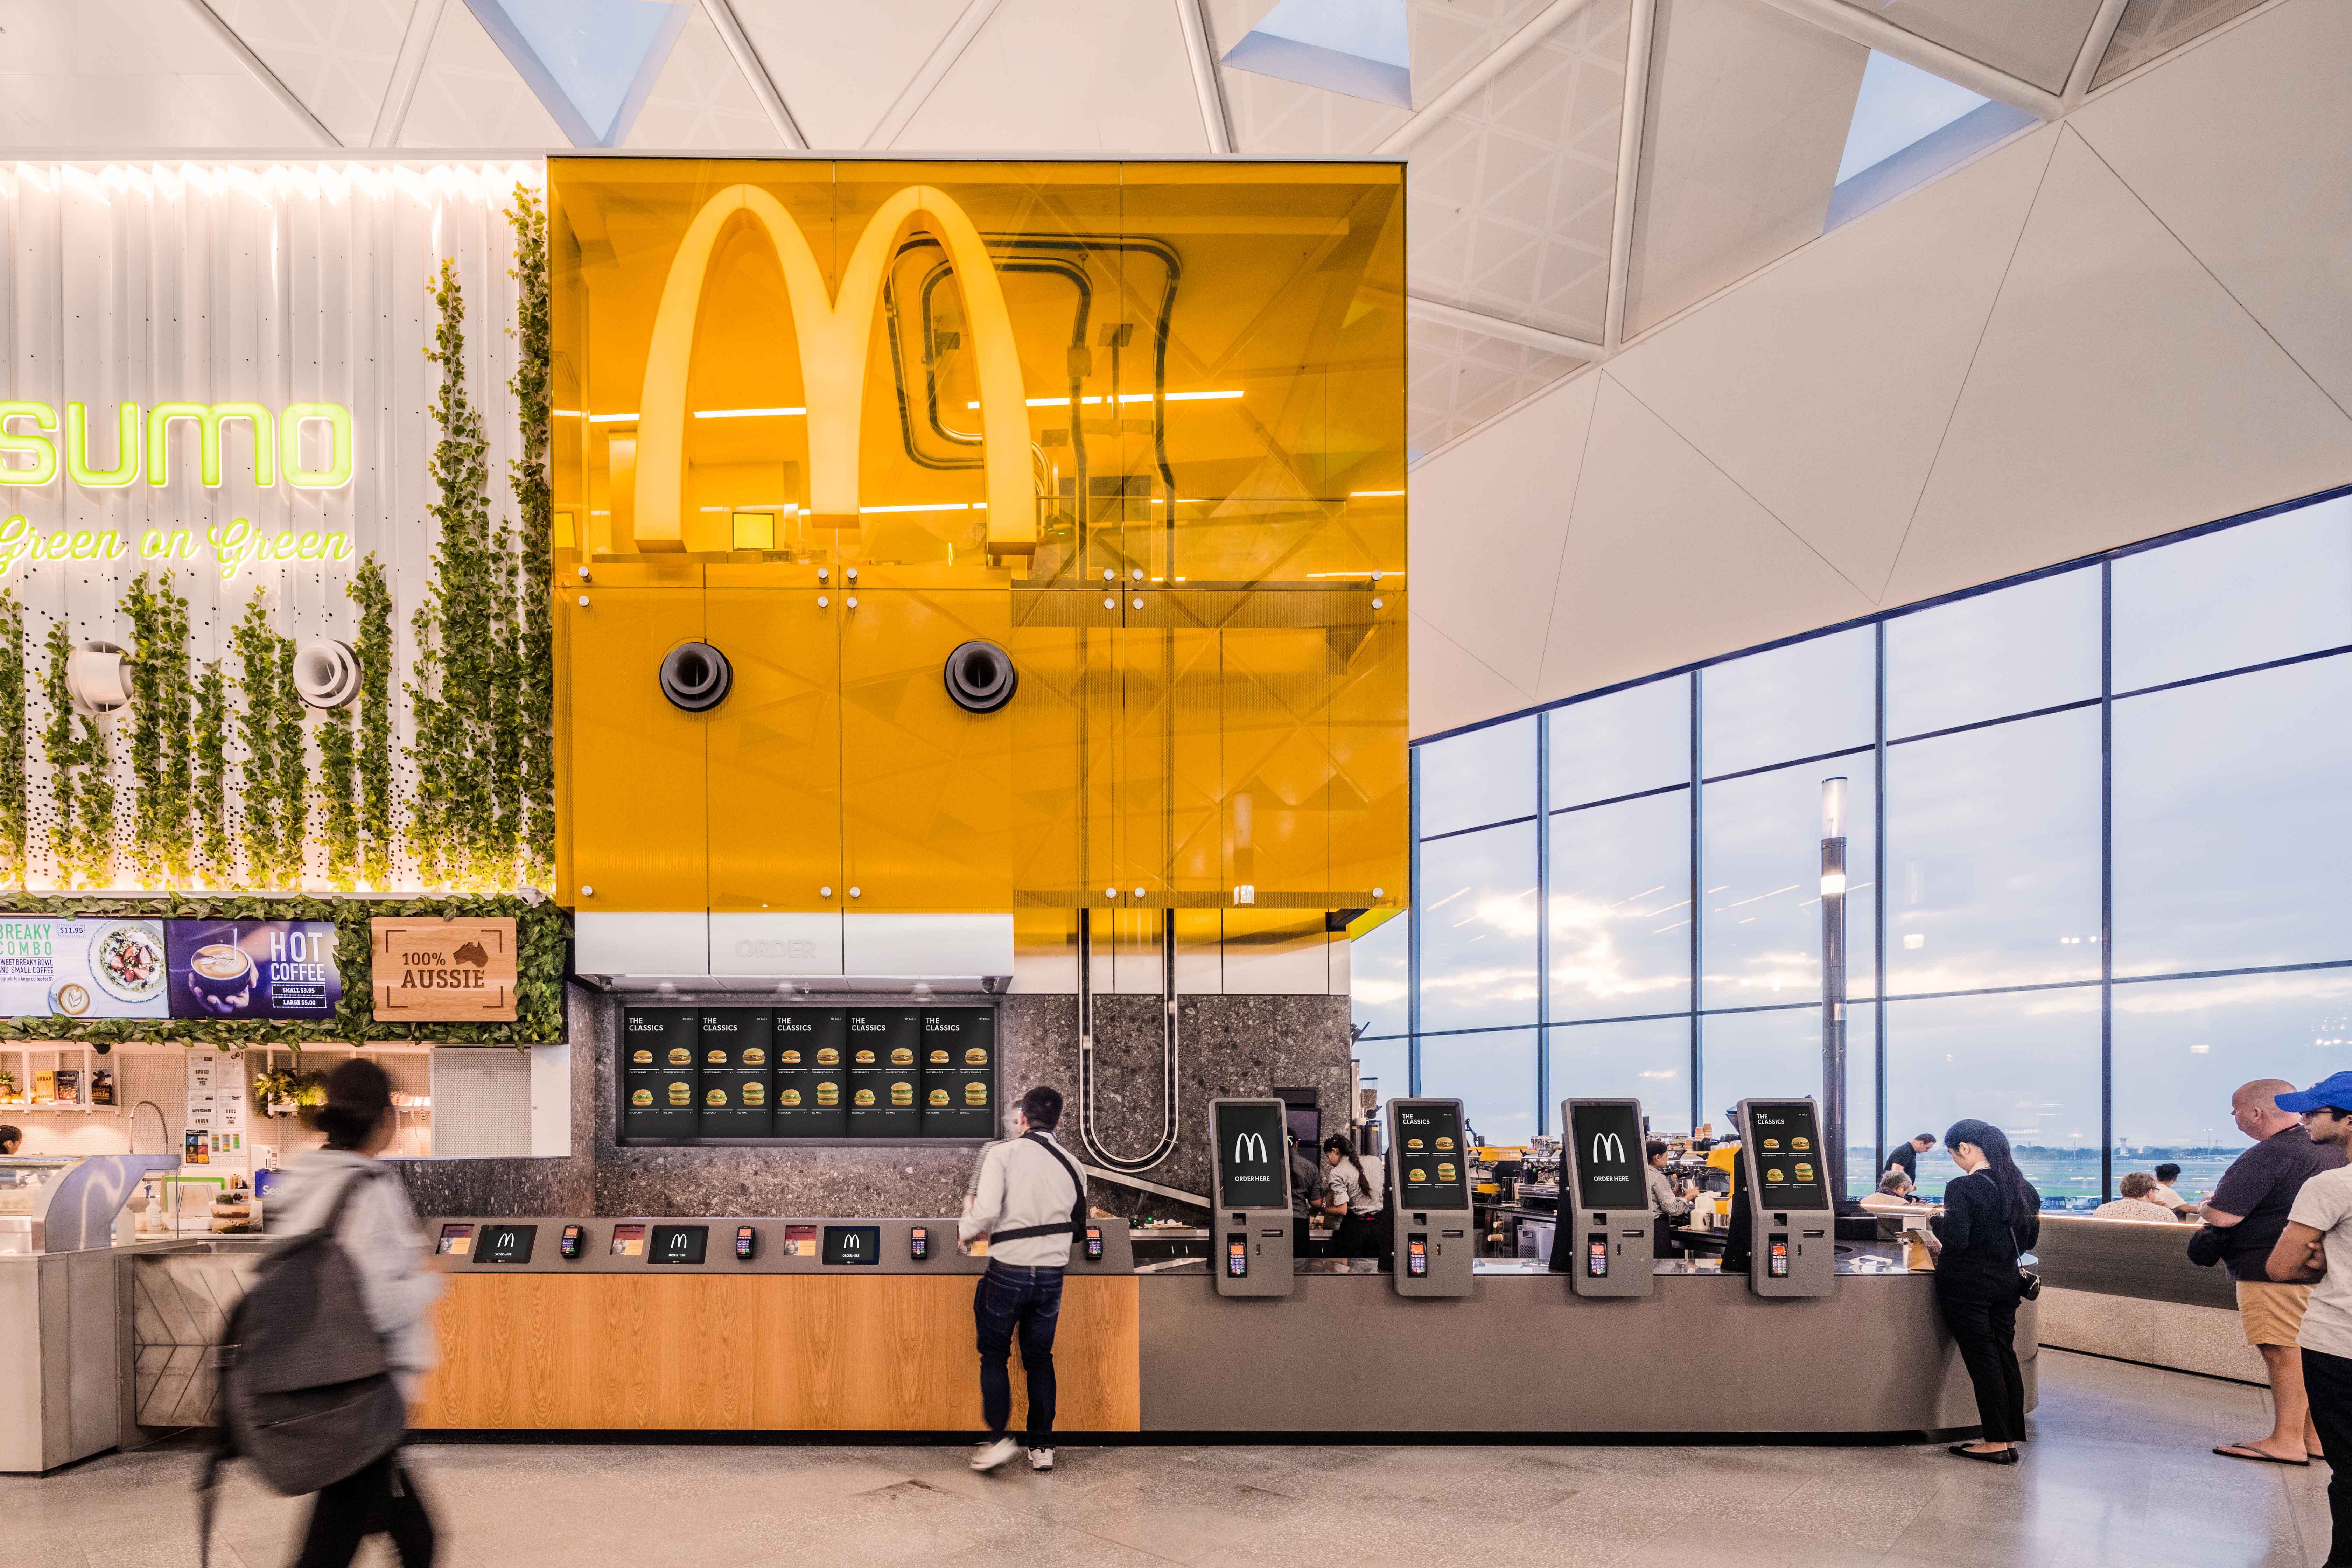 The Sky Kitchen McDonald's in the Sydney Airport.